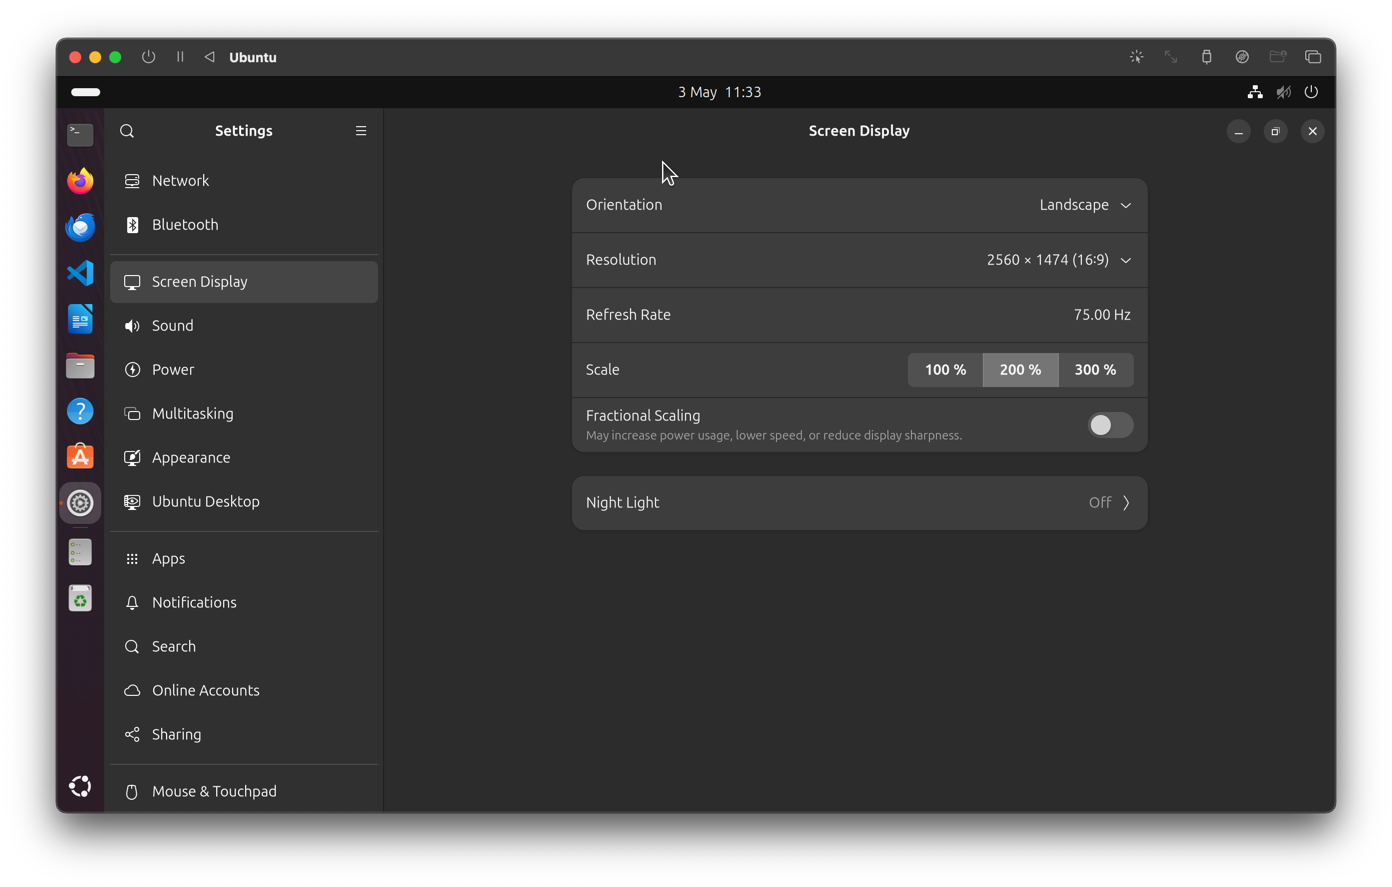 A screenshot of the Ubuntu Settings app, on the Screen Display settings. They are set to:
Orientation: Landscape
Resolution: 2560 x 1474 (16:9)
Refresh Rate: 75.00 Hz
Scale: 200%
Fractional Scaling: Off